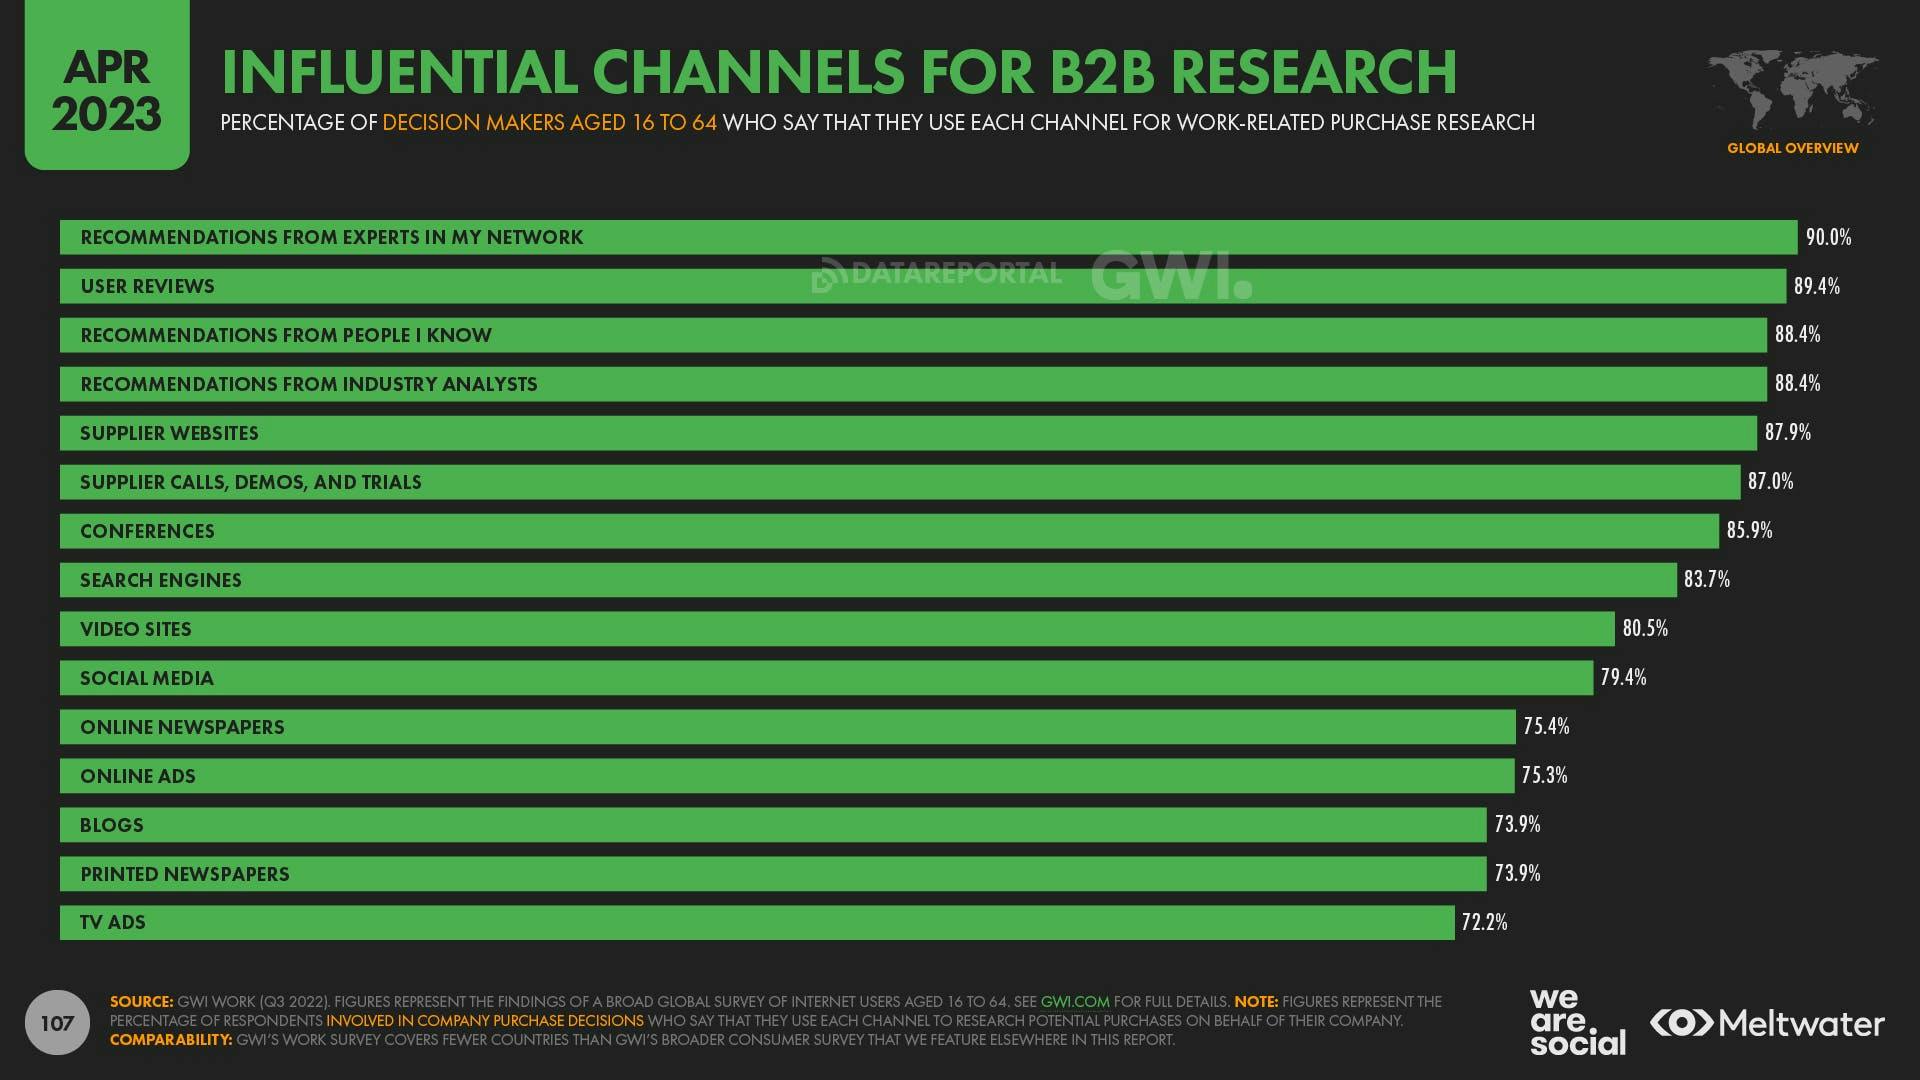 April 2023 Global State of Digital Report: Influential Channels for B2B Research